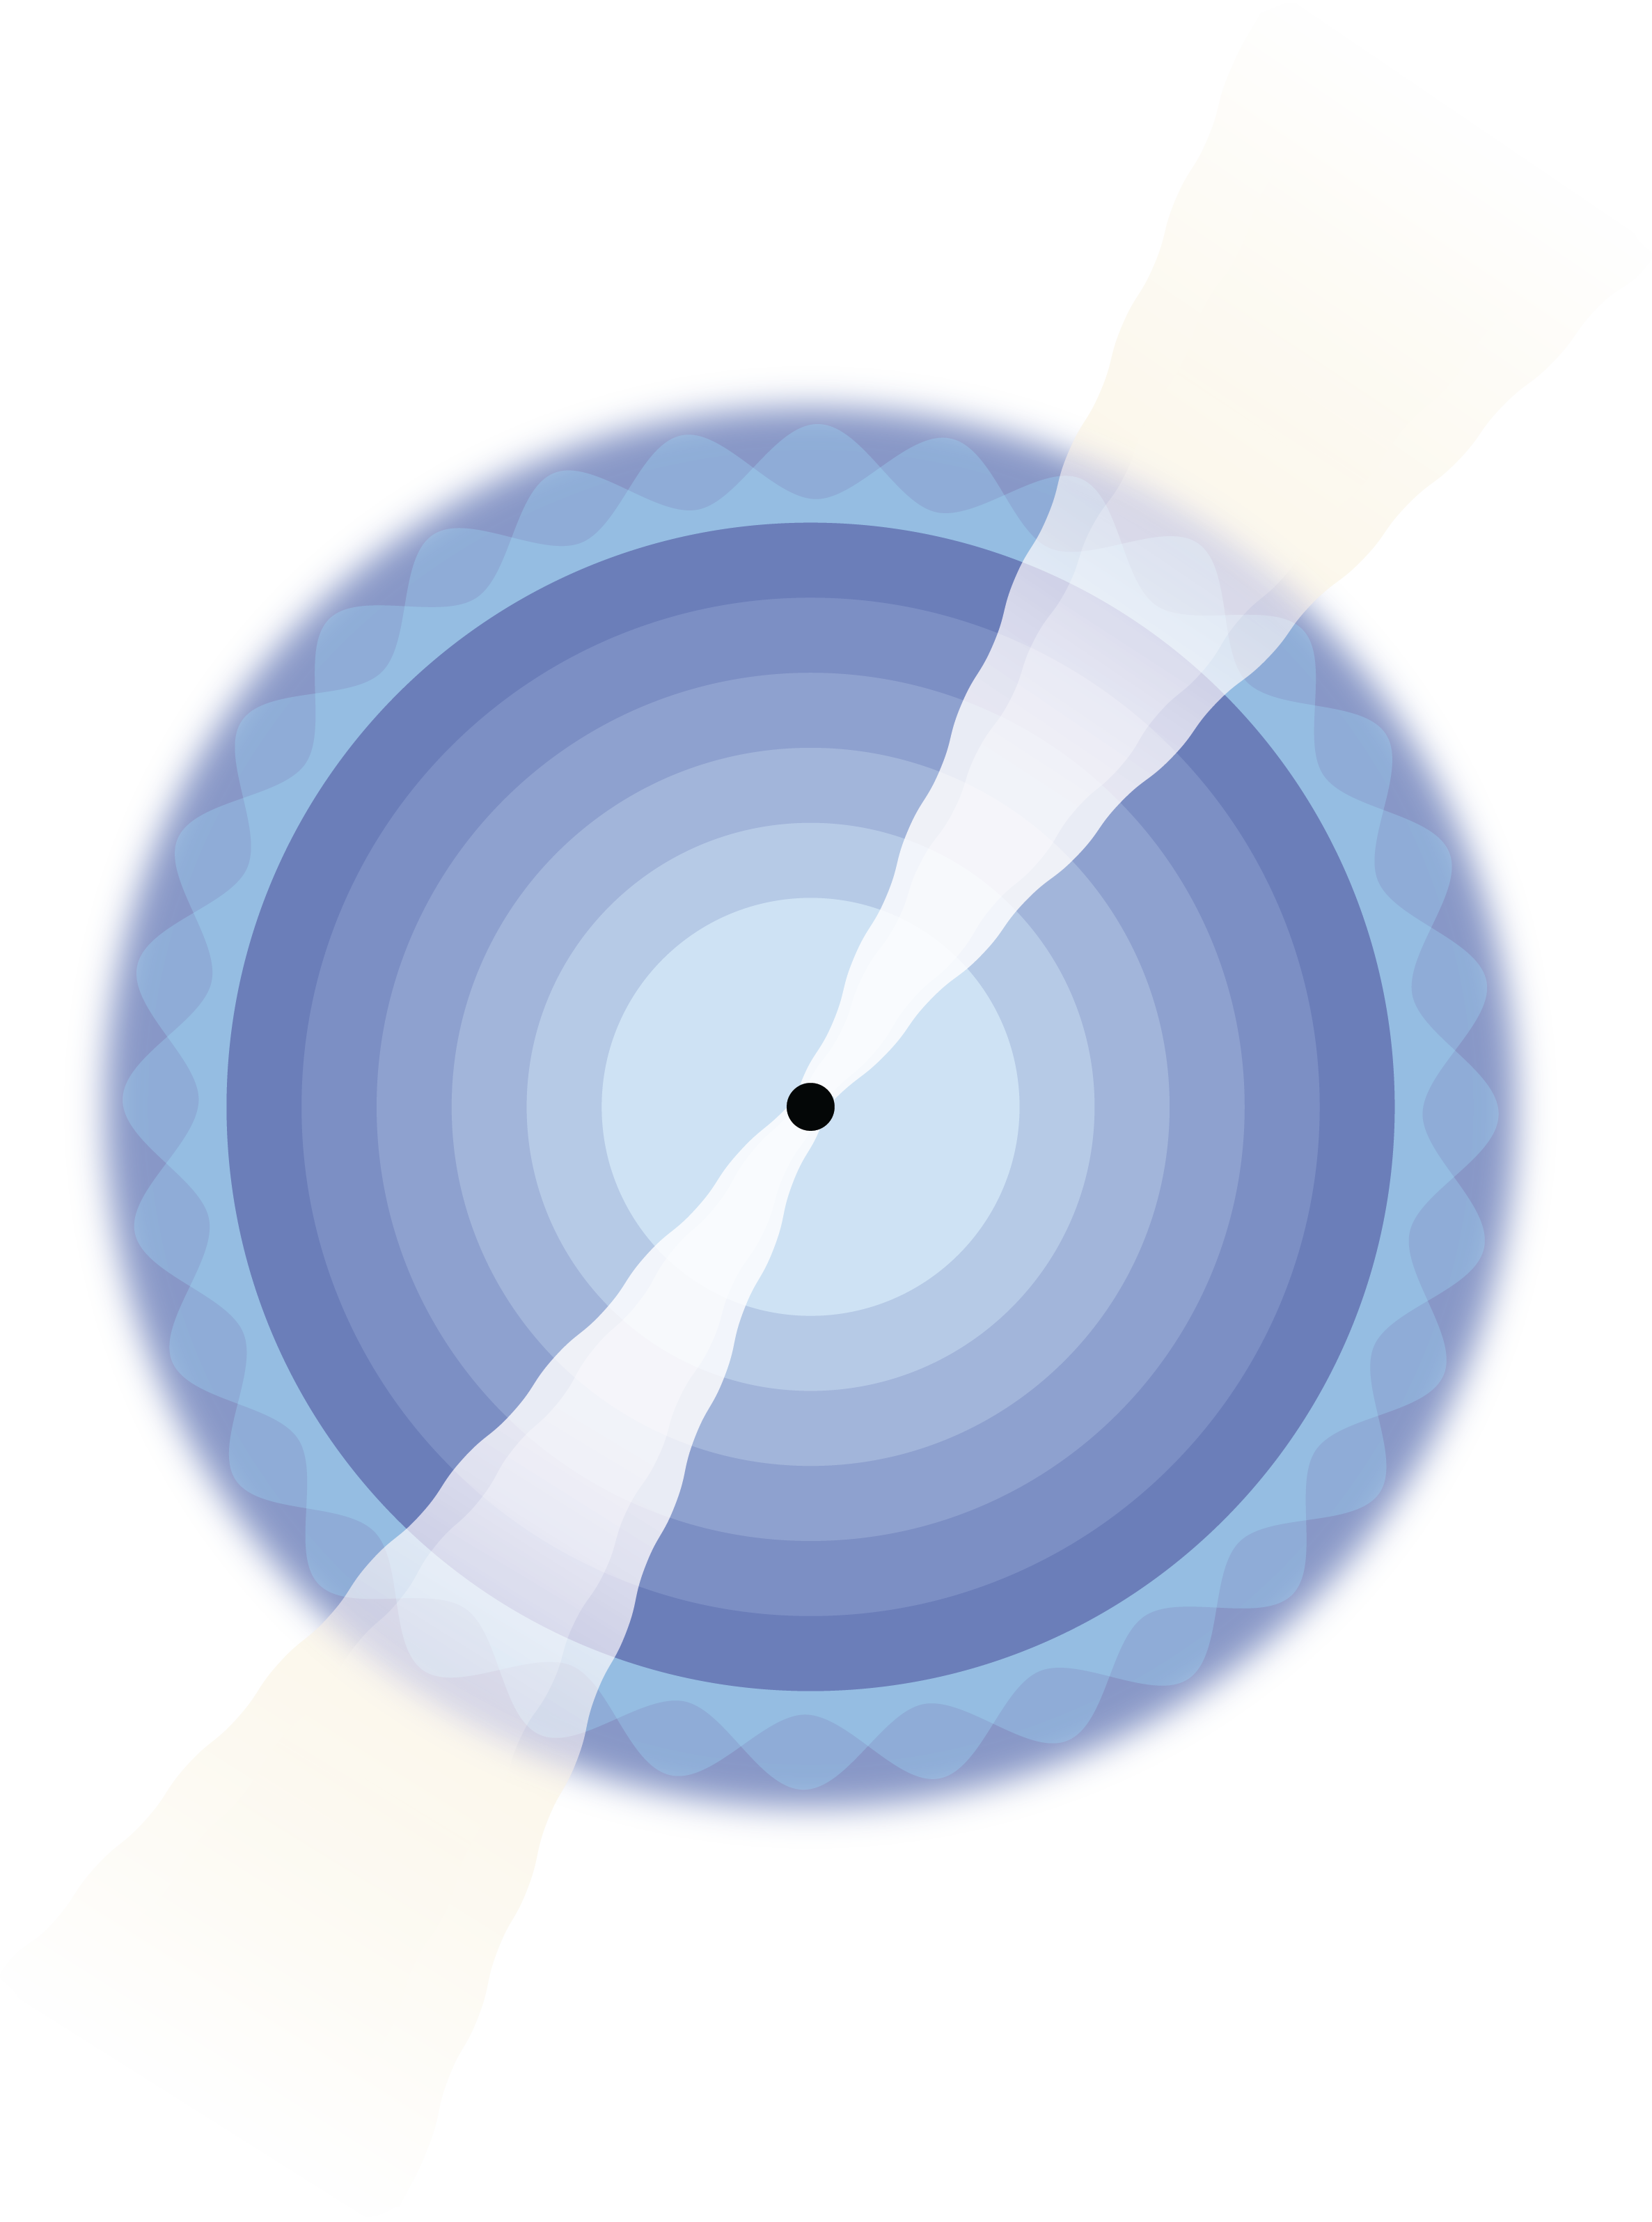 At the center of a series of nested blue circles is a black dot representing a black hole. A pair of cone-shaped, white jets emerge from either side of the black hole, tilted 45 degrees from vertical. The outermost blue circle has layered scalloped edges.